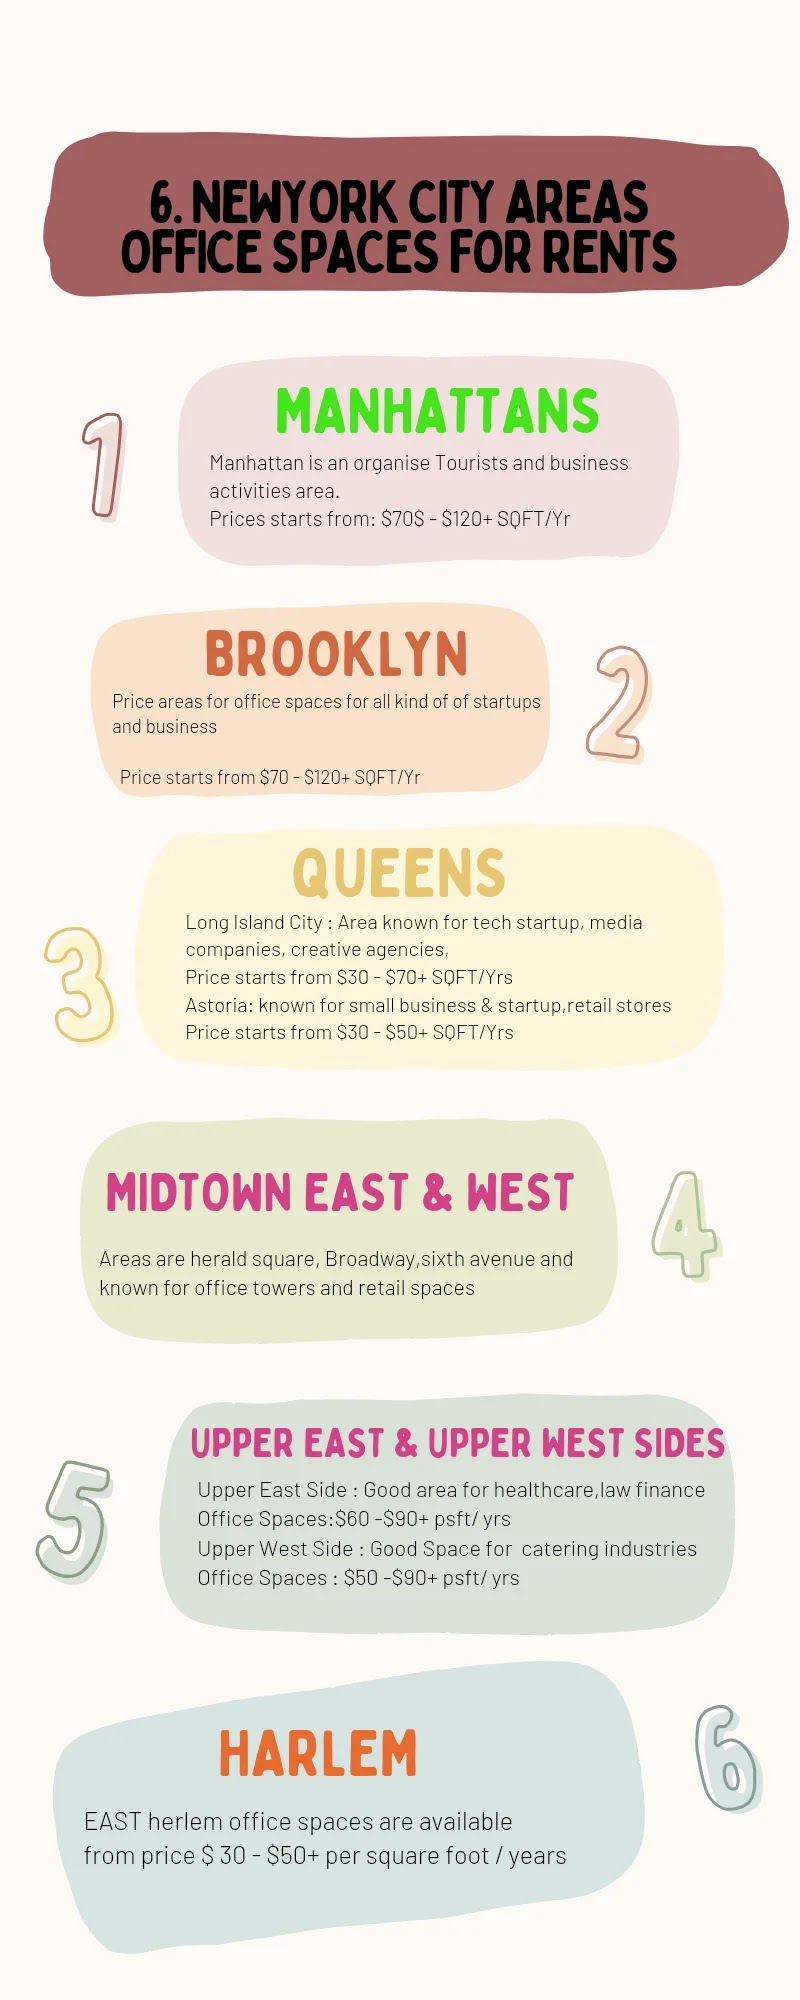 This image explain the information about New York City top 6 places office spaces for rents in topic "Office Space for Rent New York City".